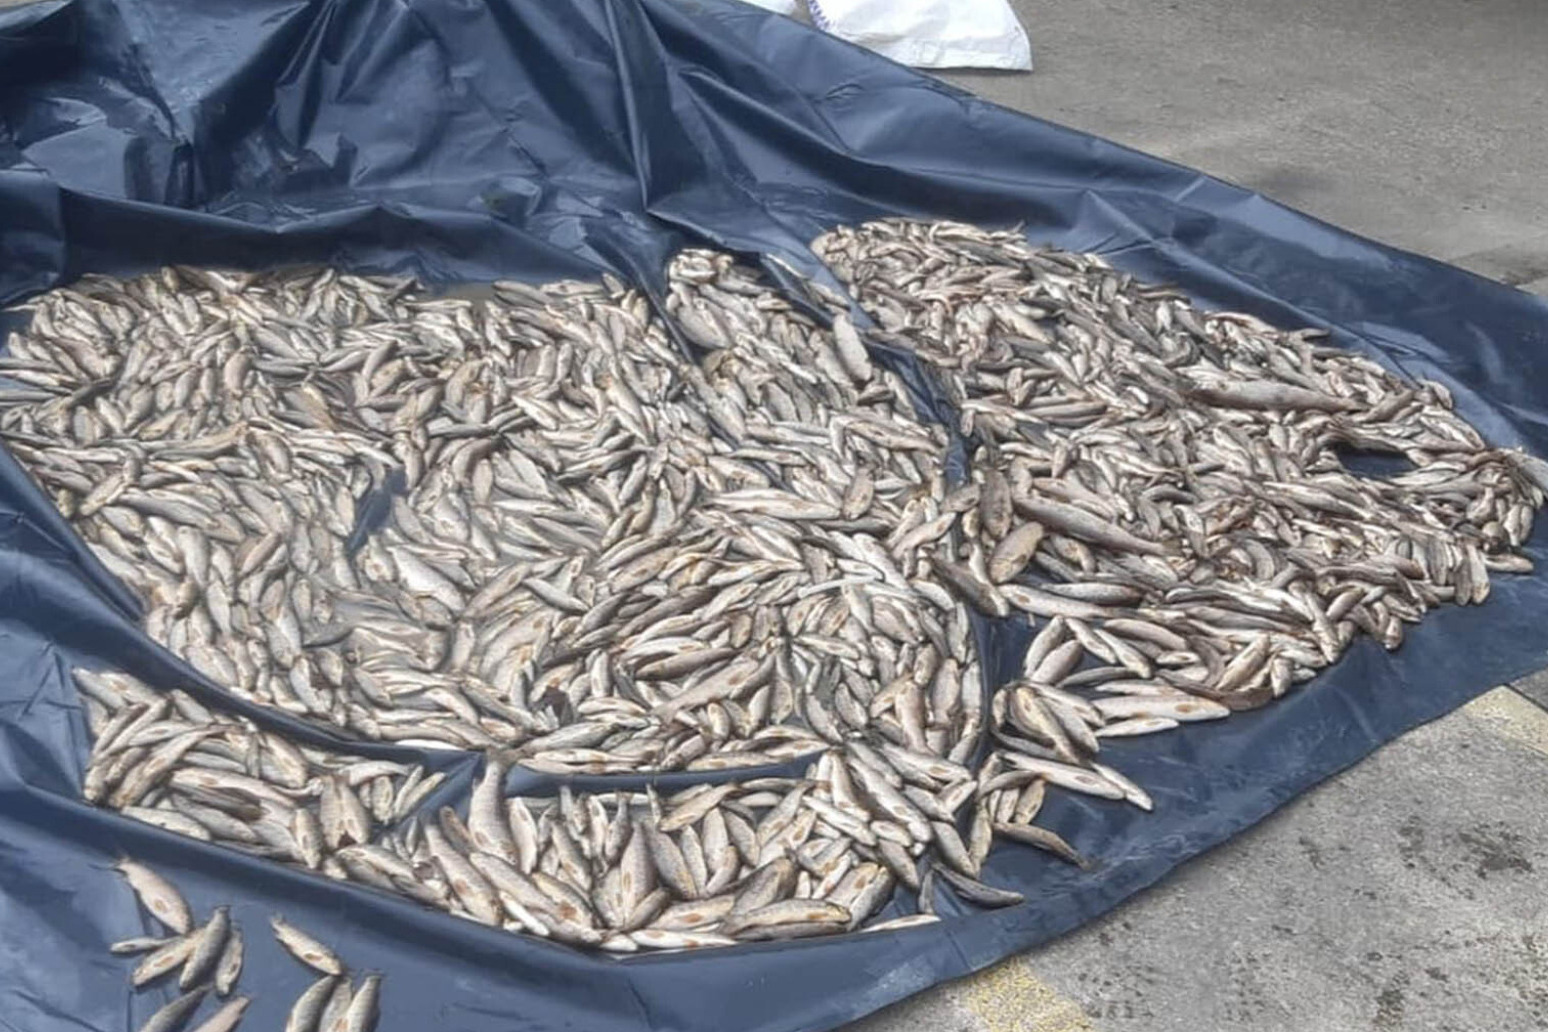 2,250 fish found dead in Donegal river 